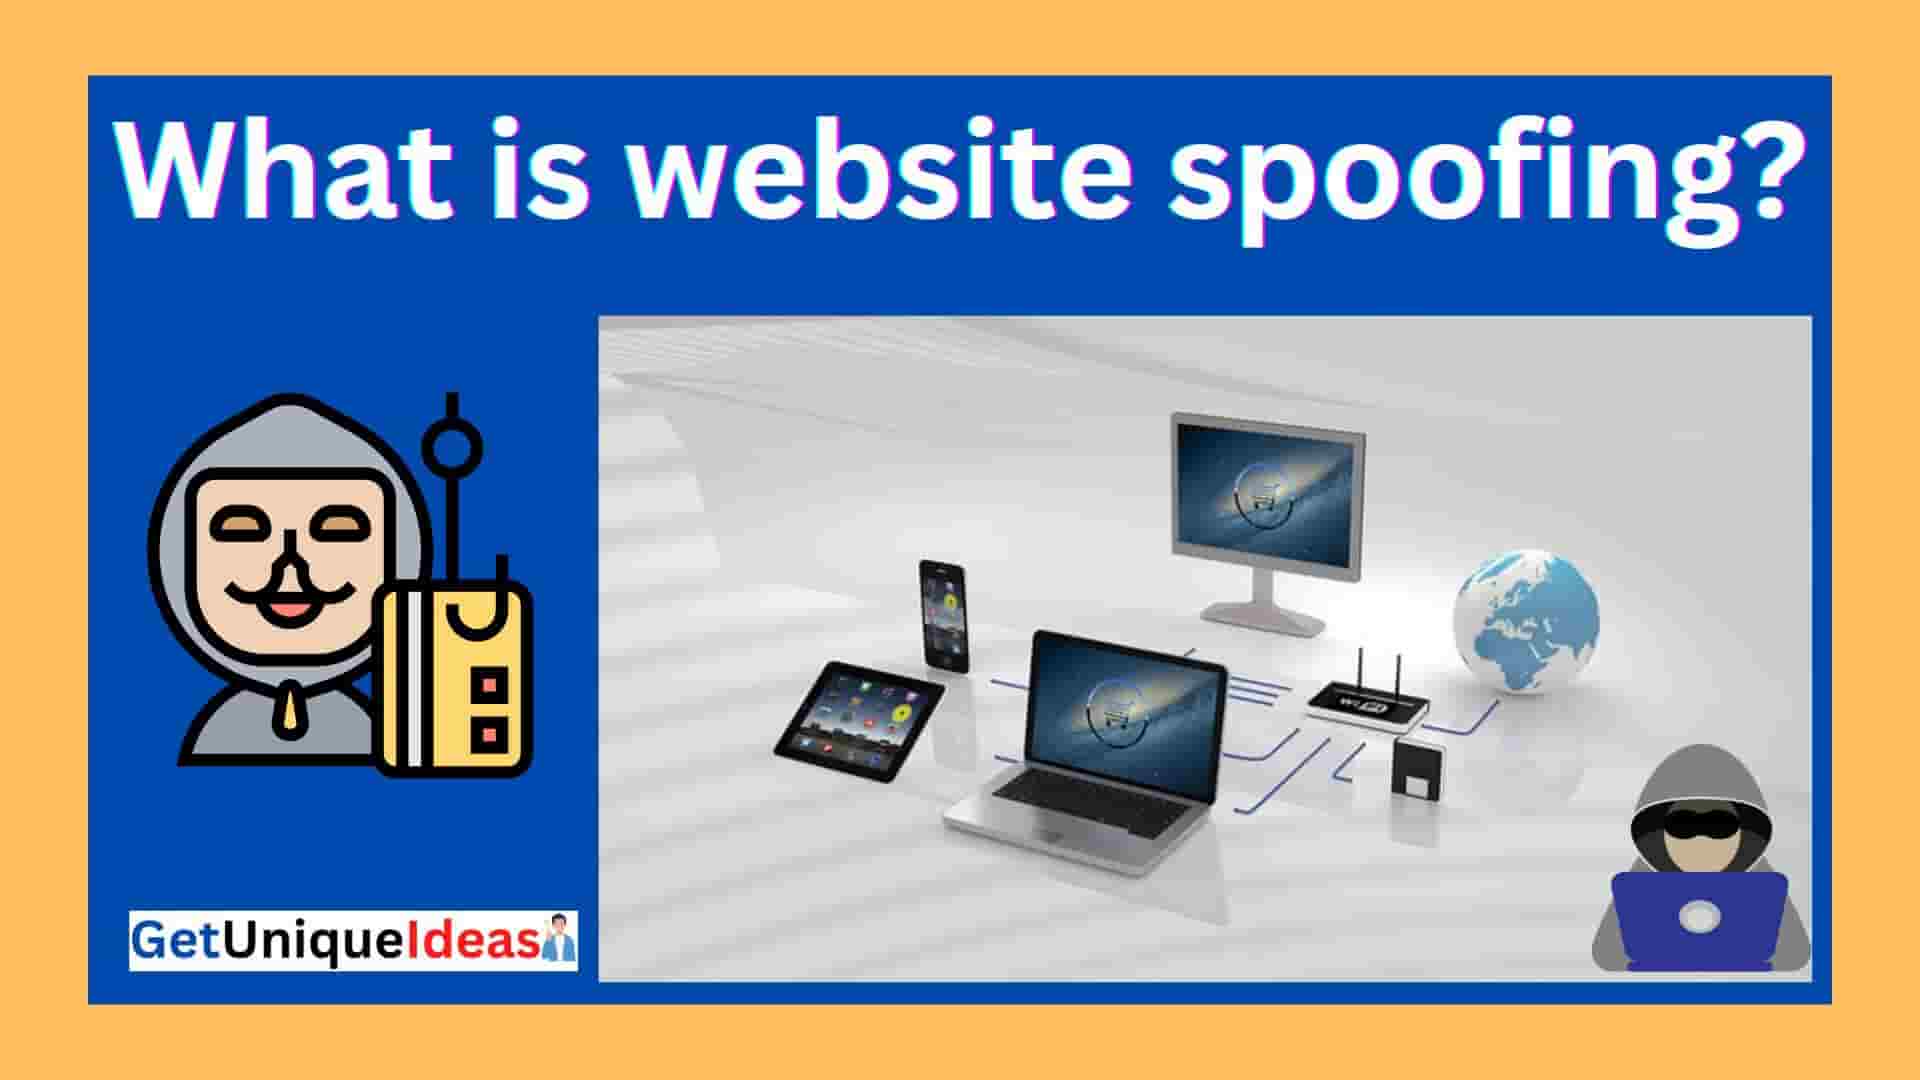 What is website spoofing?